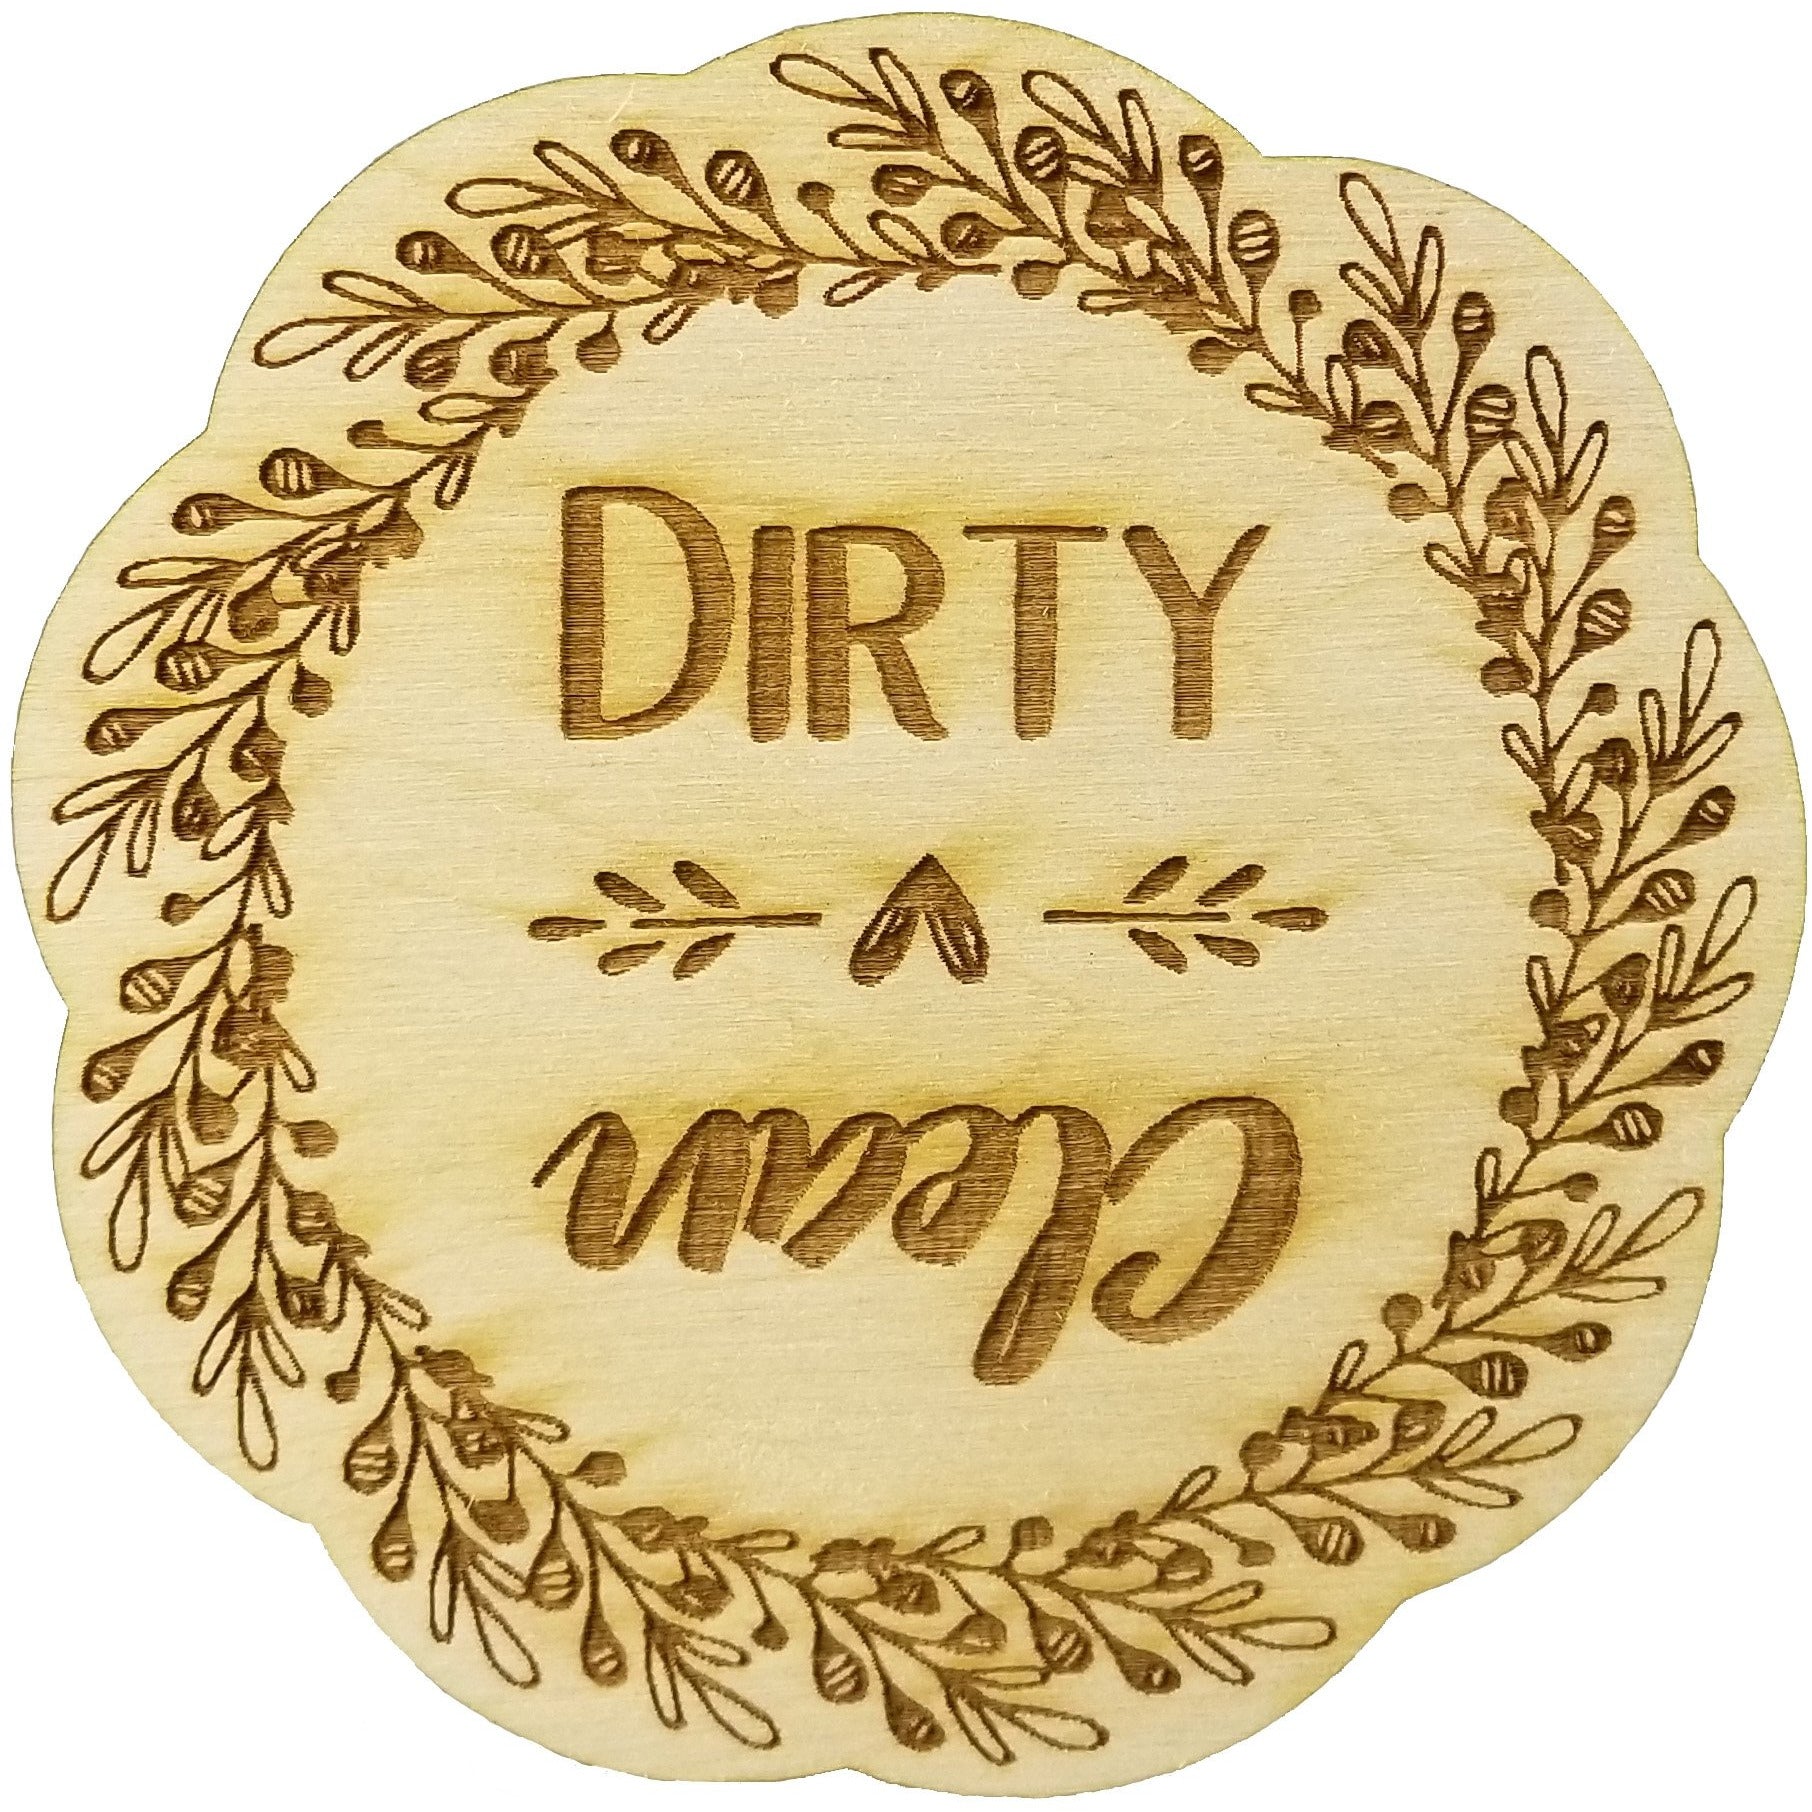 IS Gift Clean/Dirty Dishwasher Sign